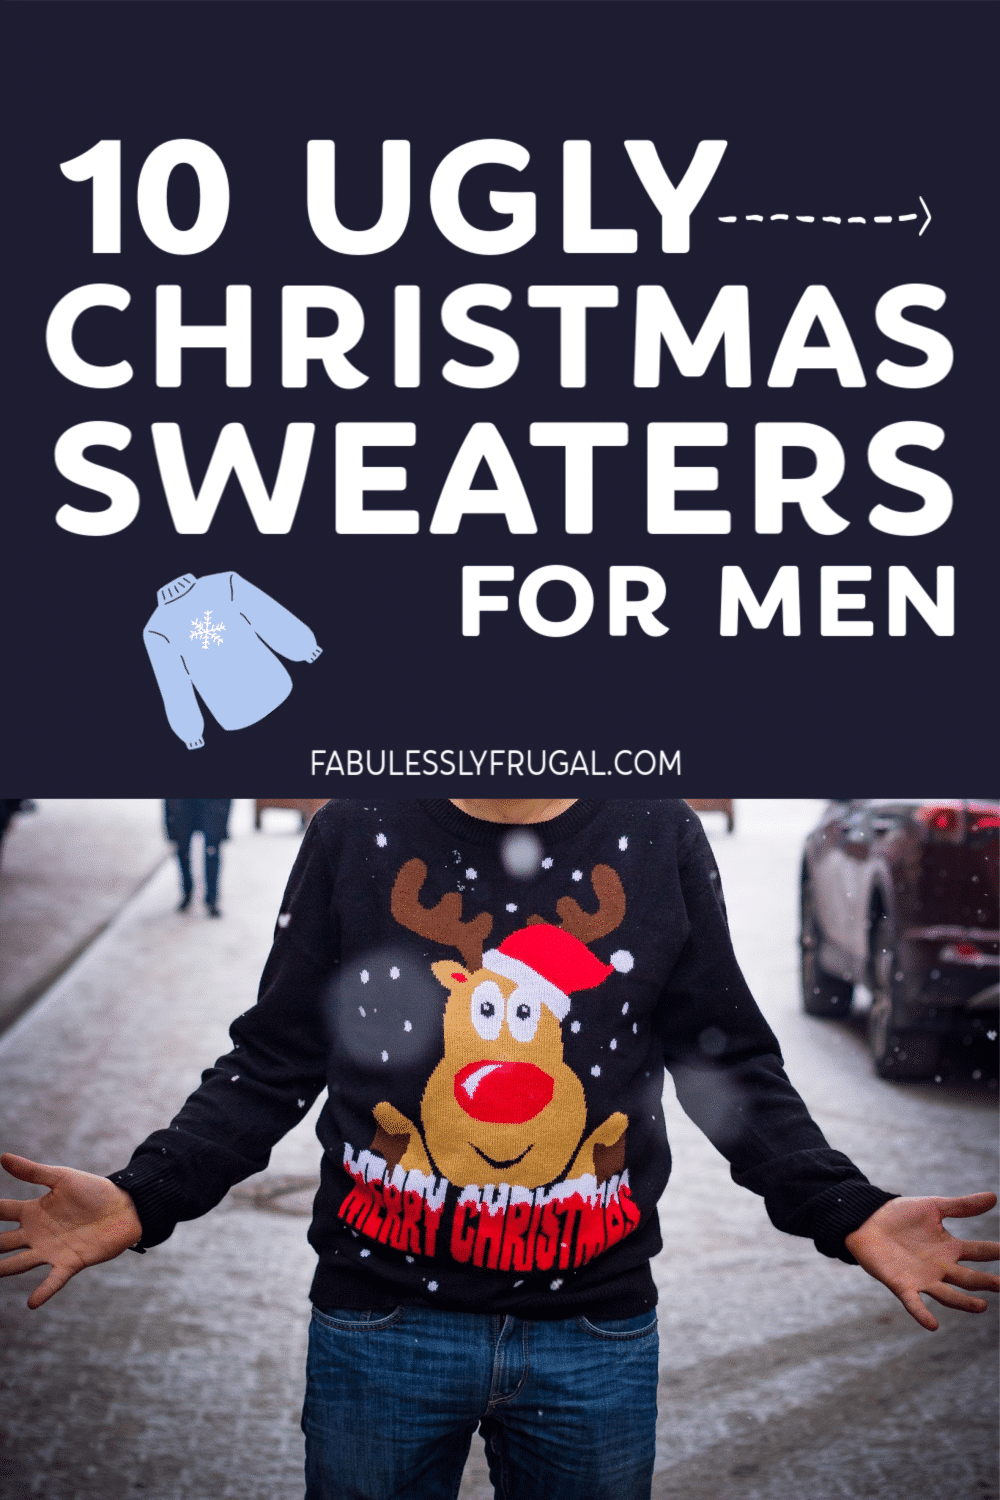 Mens ugly Christmas sweaters